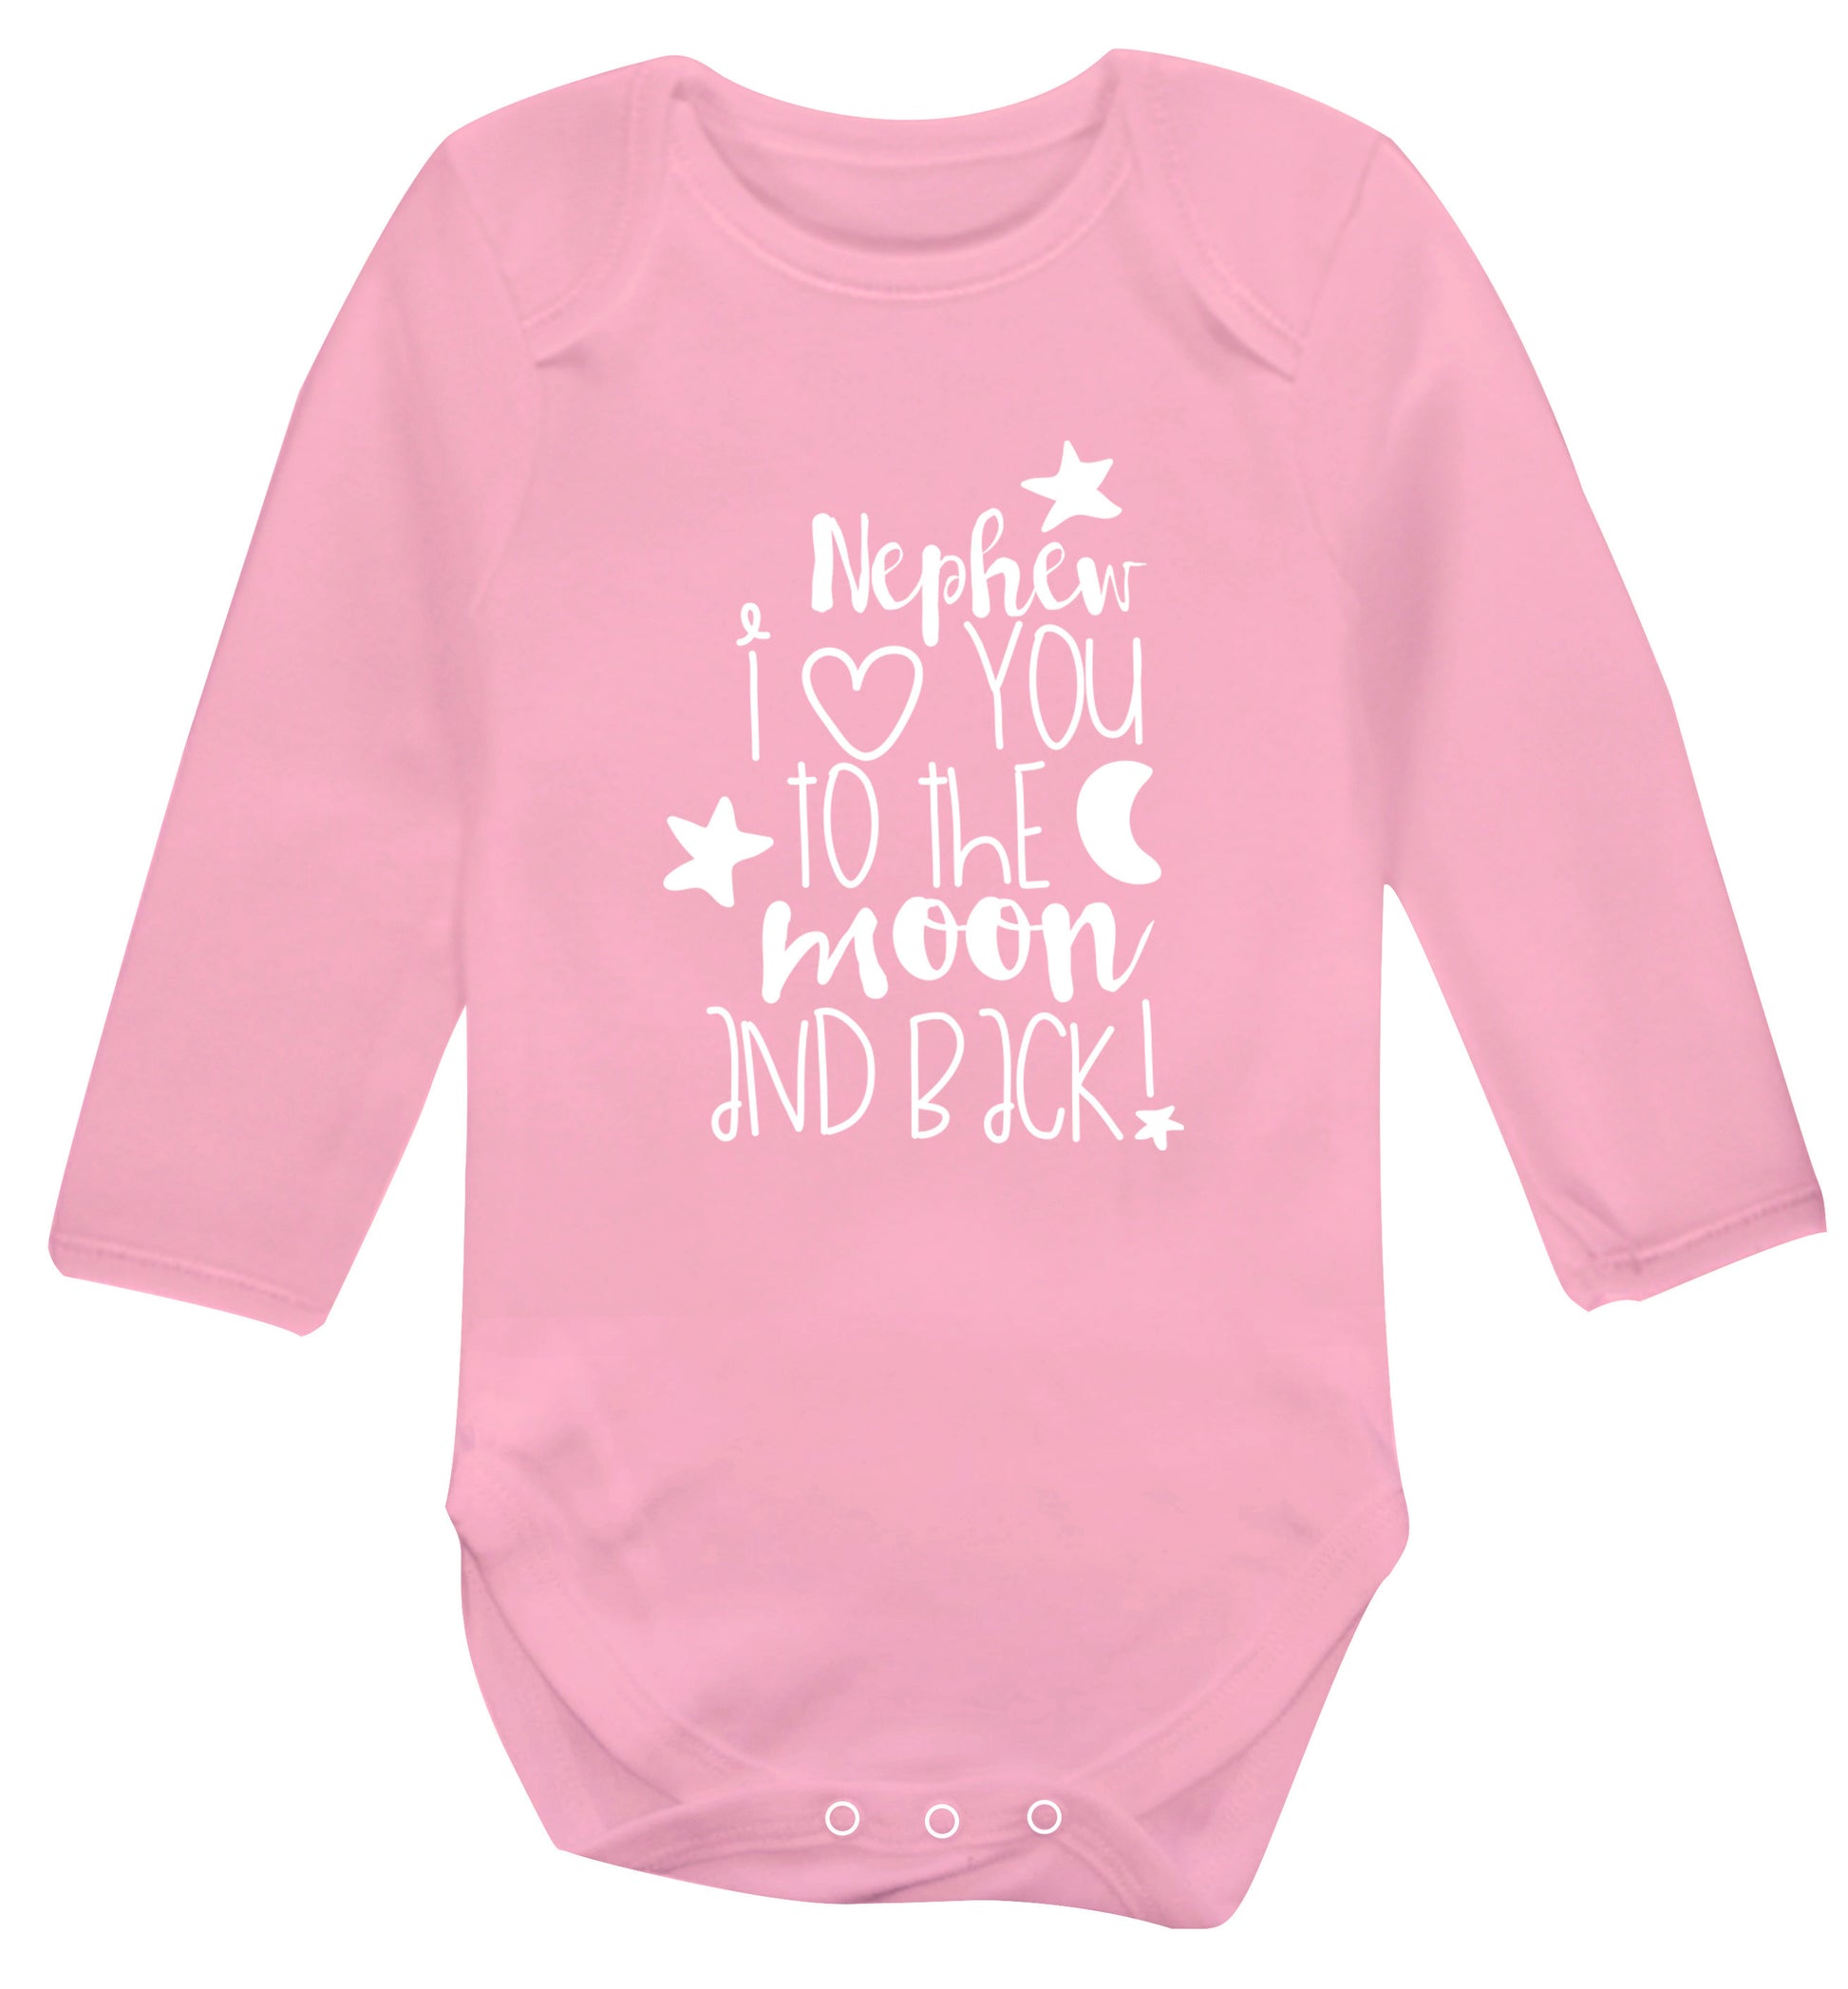 Nephew I love you to the moon and back Baby Vest long sleeved pale pink 6-12 months